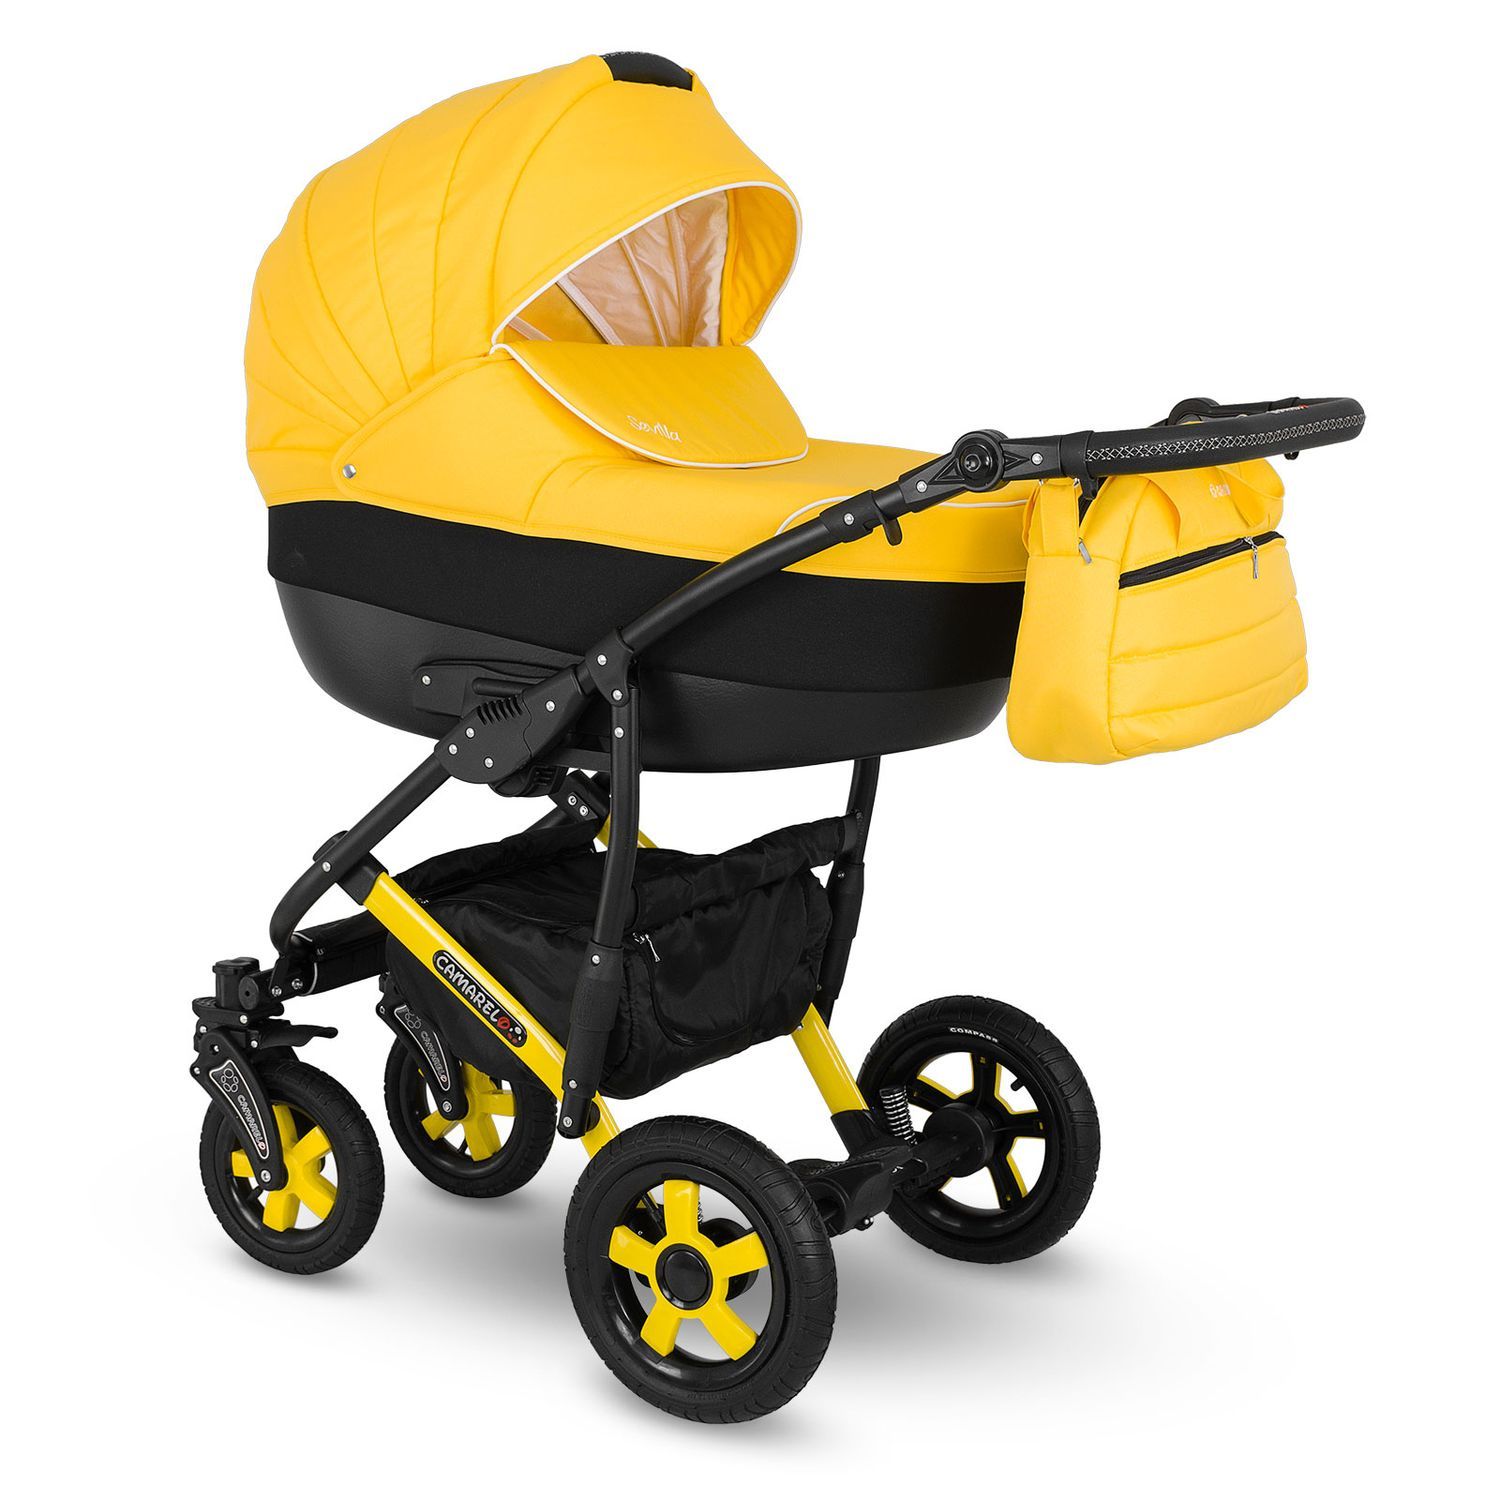 Overview of the baby stroller Camarelo Sevilla 2 in 1